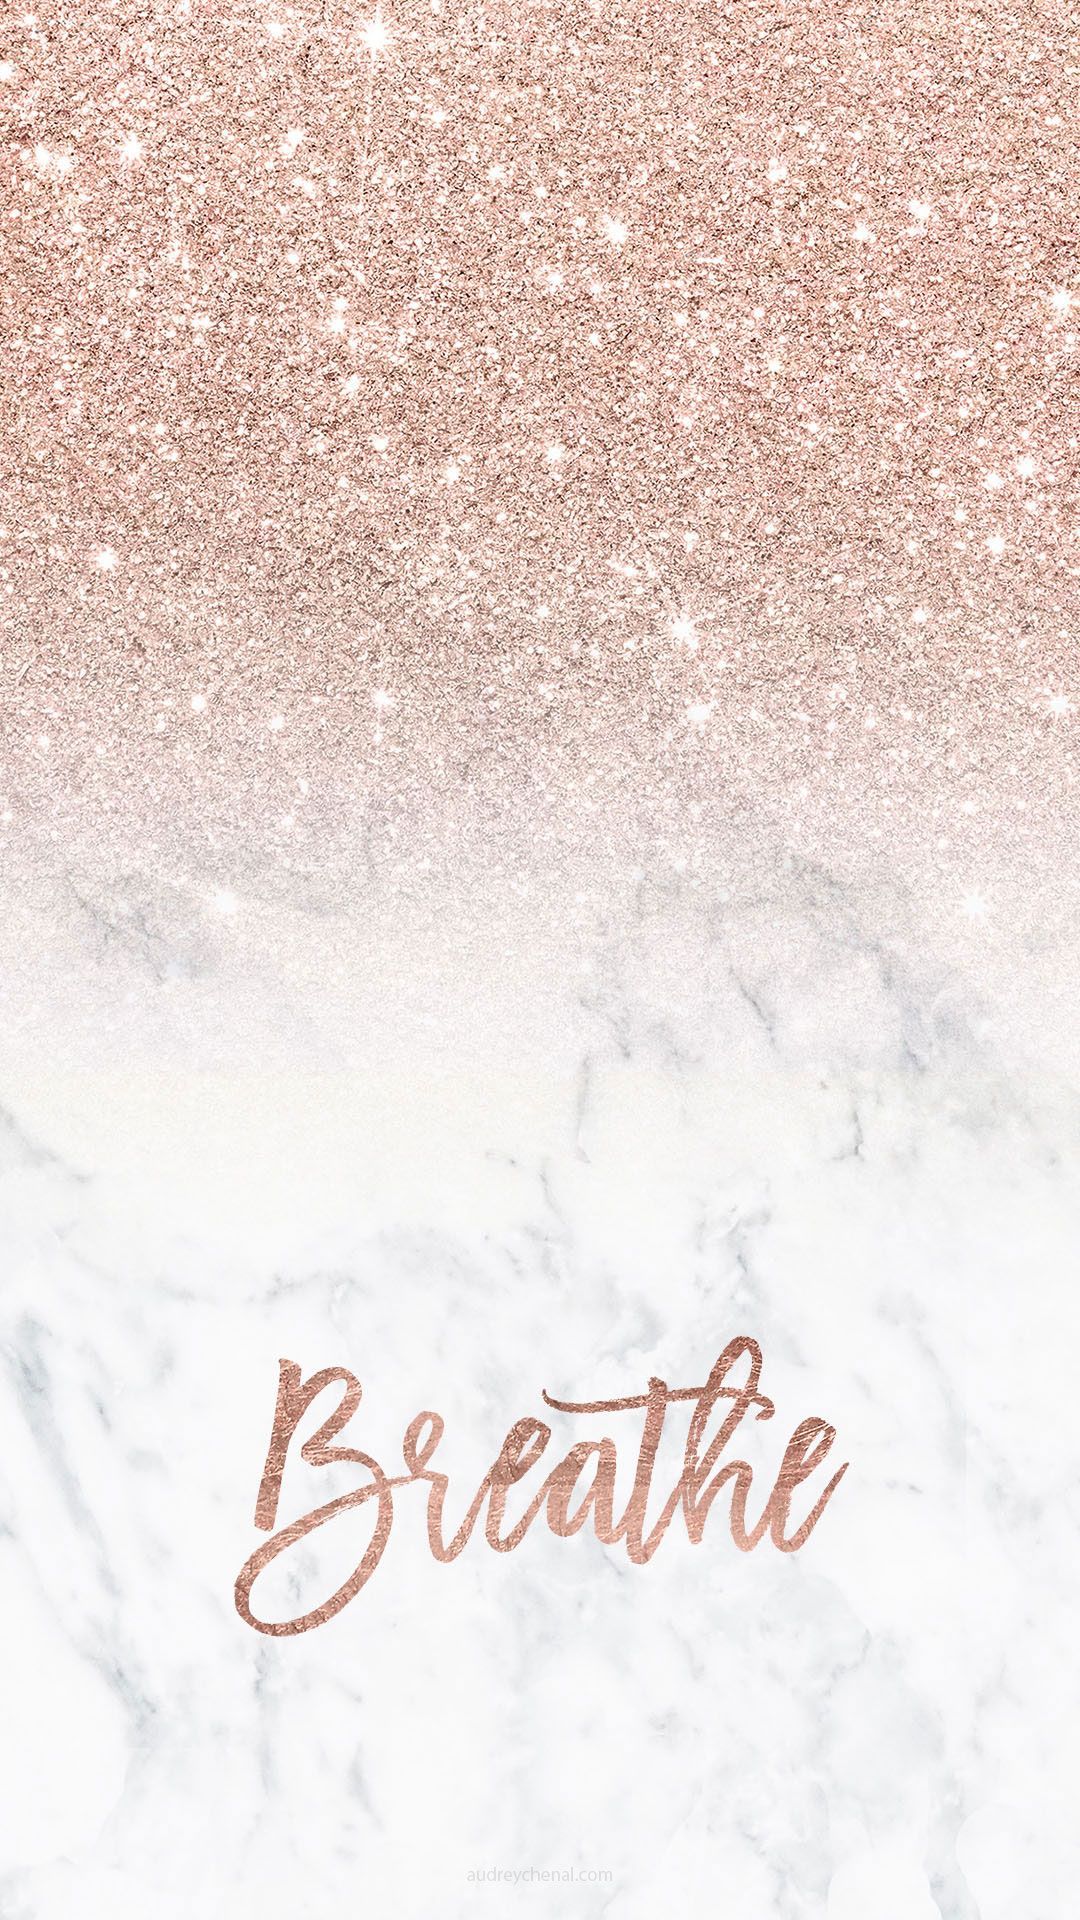 Modern girly free IPhone wallpaper background download. Rose